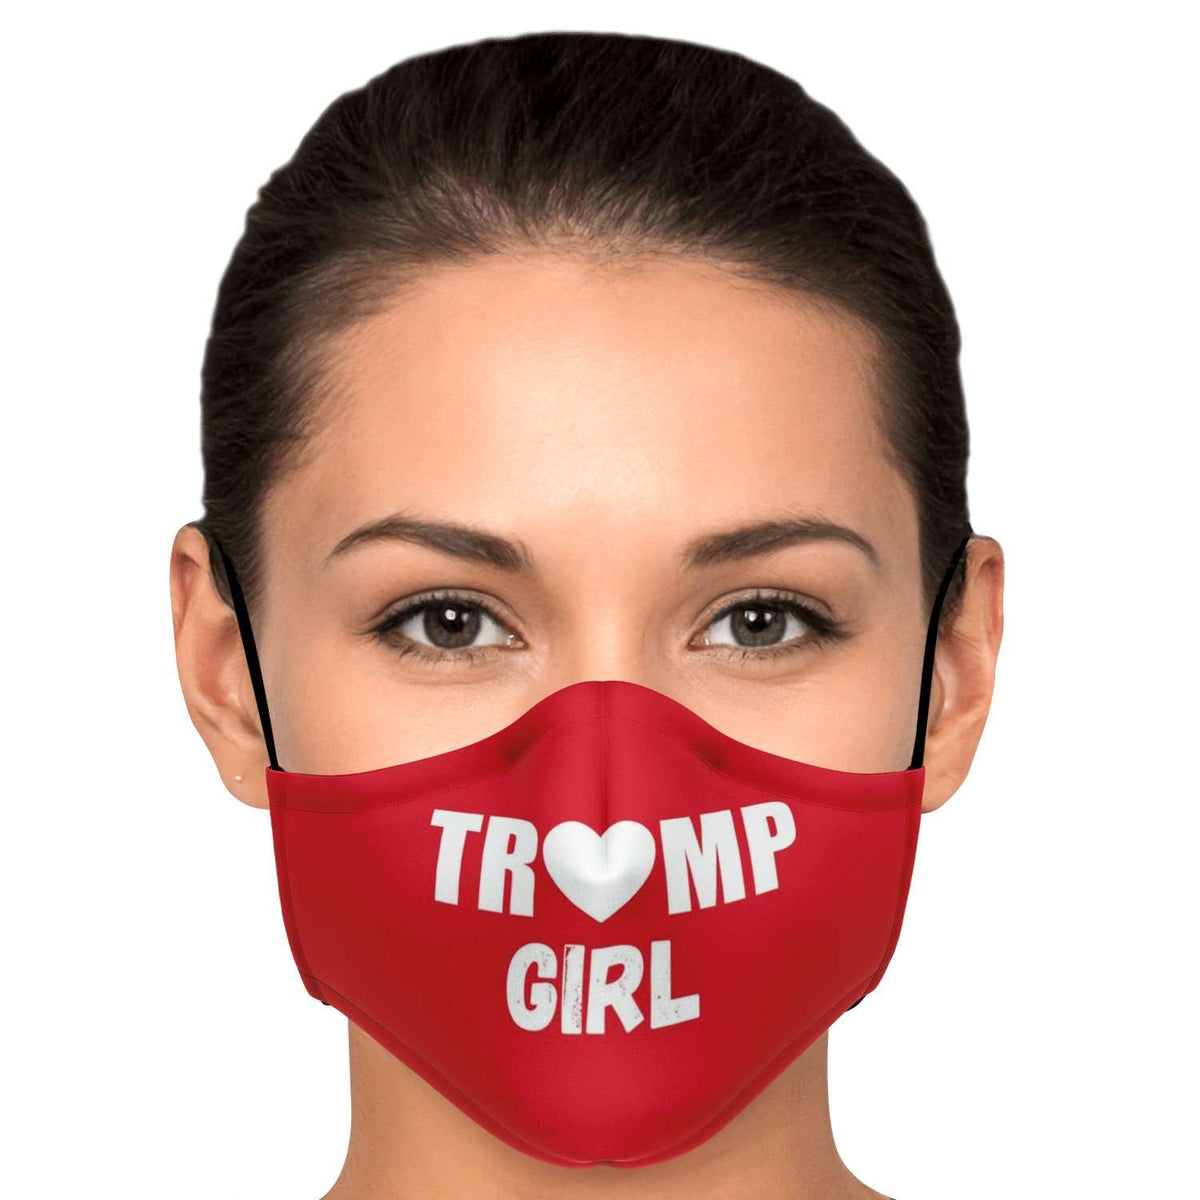 Designs by MyUtopia Shout Out:Trump Girl Adult Fitted Face Mask with Adjustable Ear Loops,Adult / Single / No filters,Fabric Face Mask